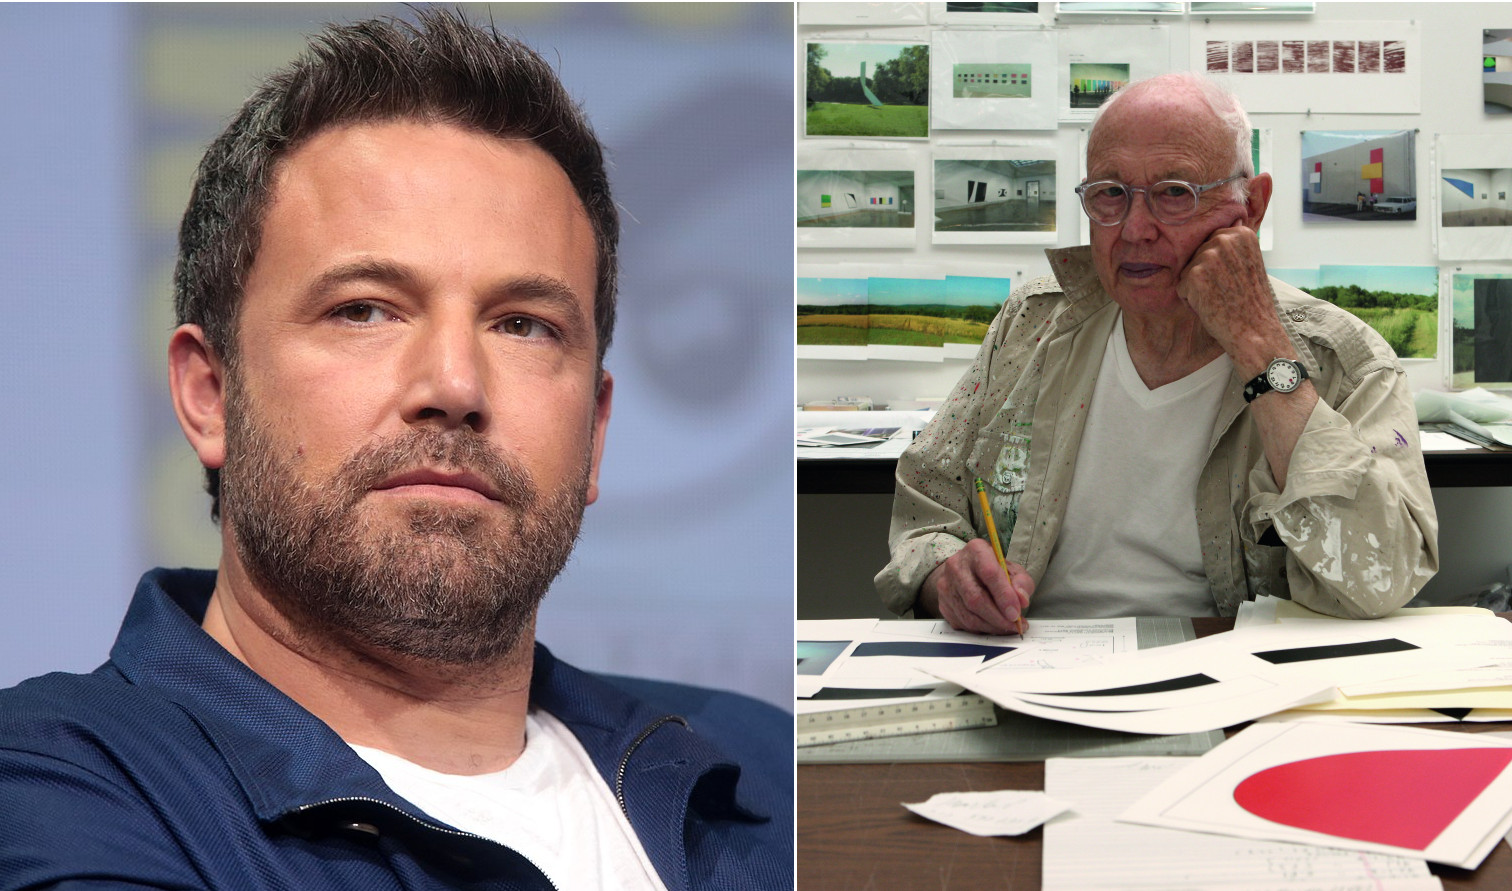 From left: Ben Affleck (photograph by Gage Skidmore), Ellsworth Kelly (photograph by Jack Shear)